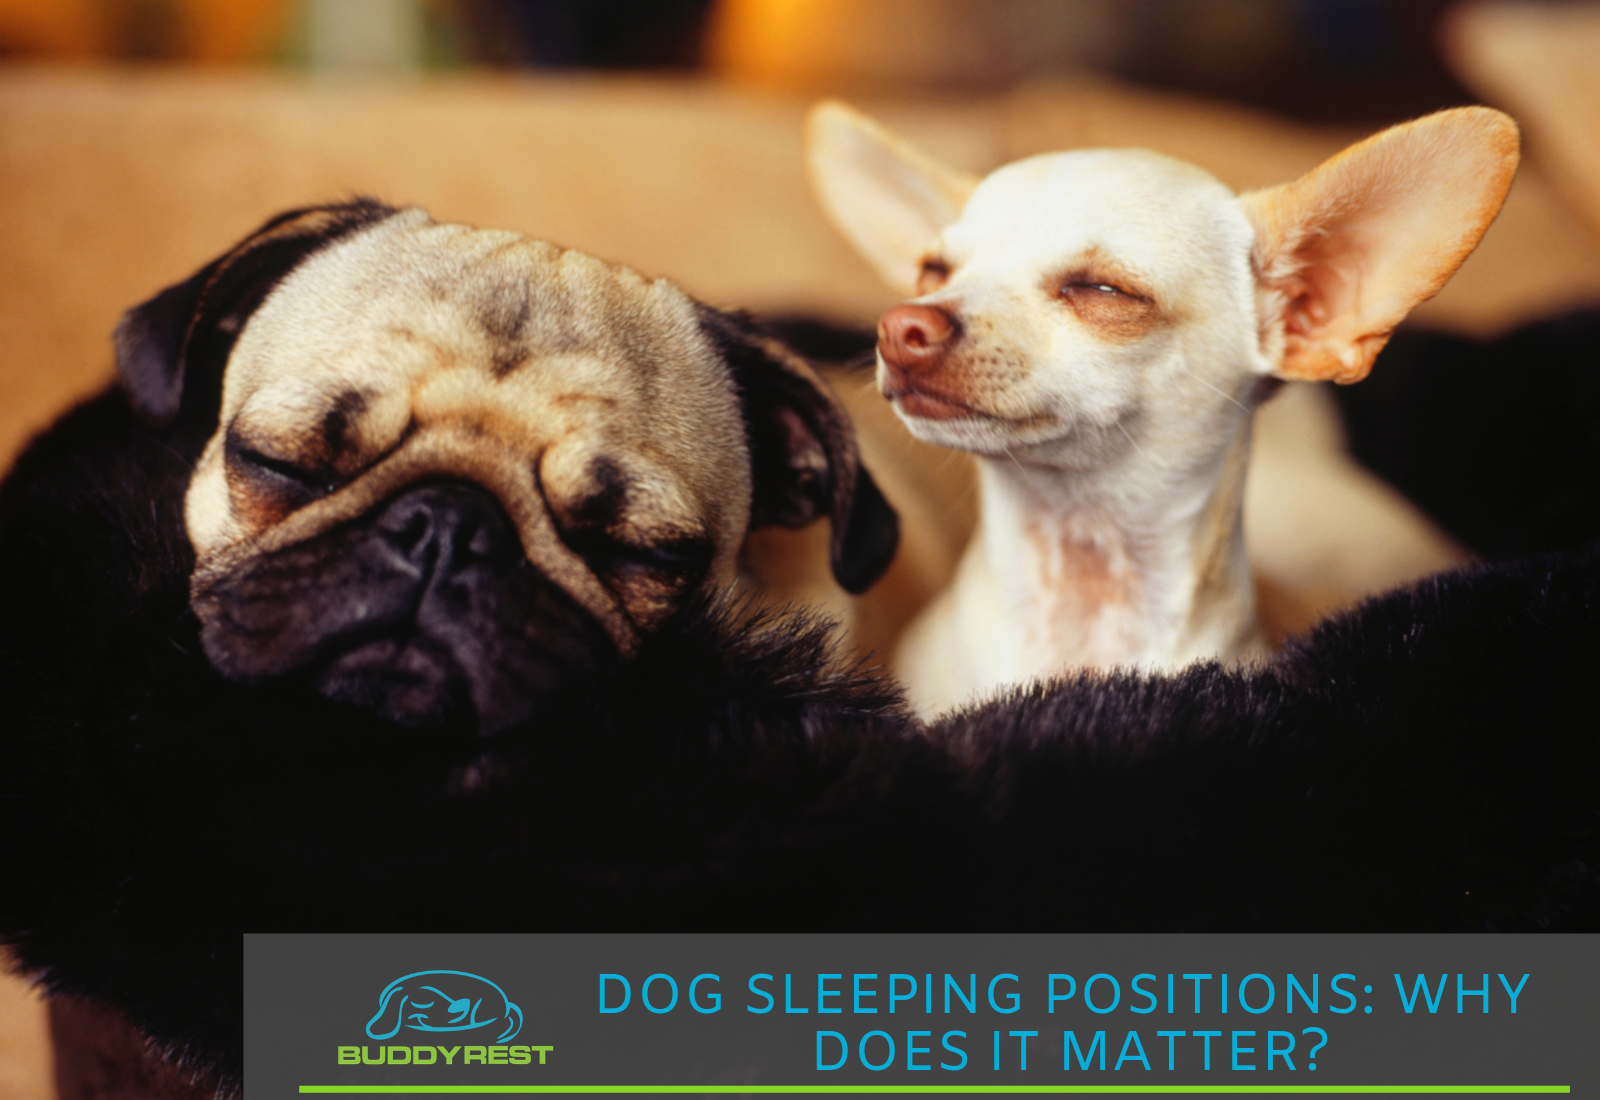 Dog Sleeping Positions: Why does it matter?